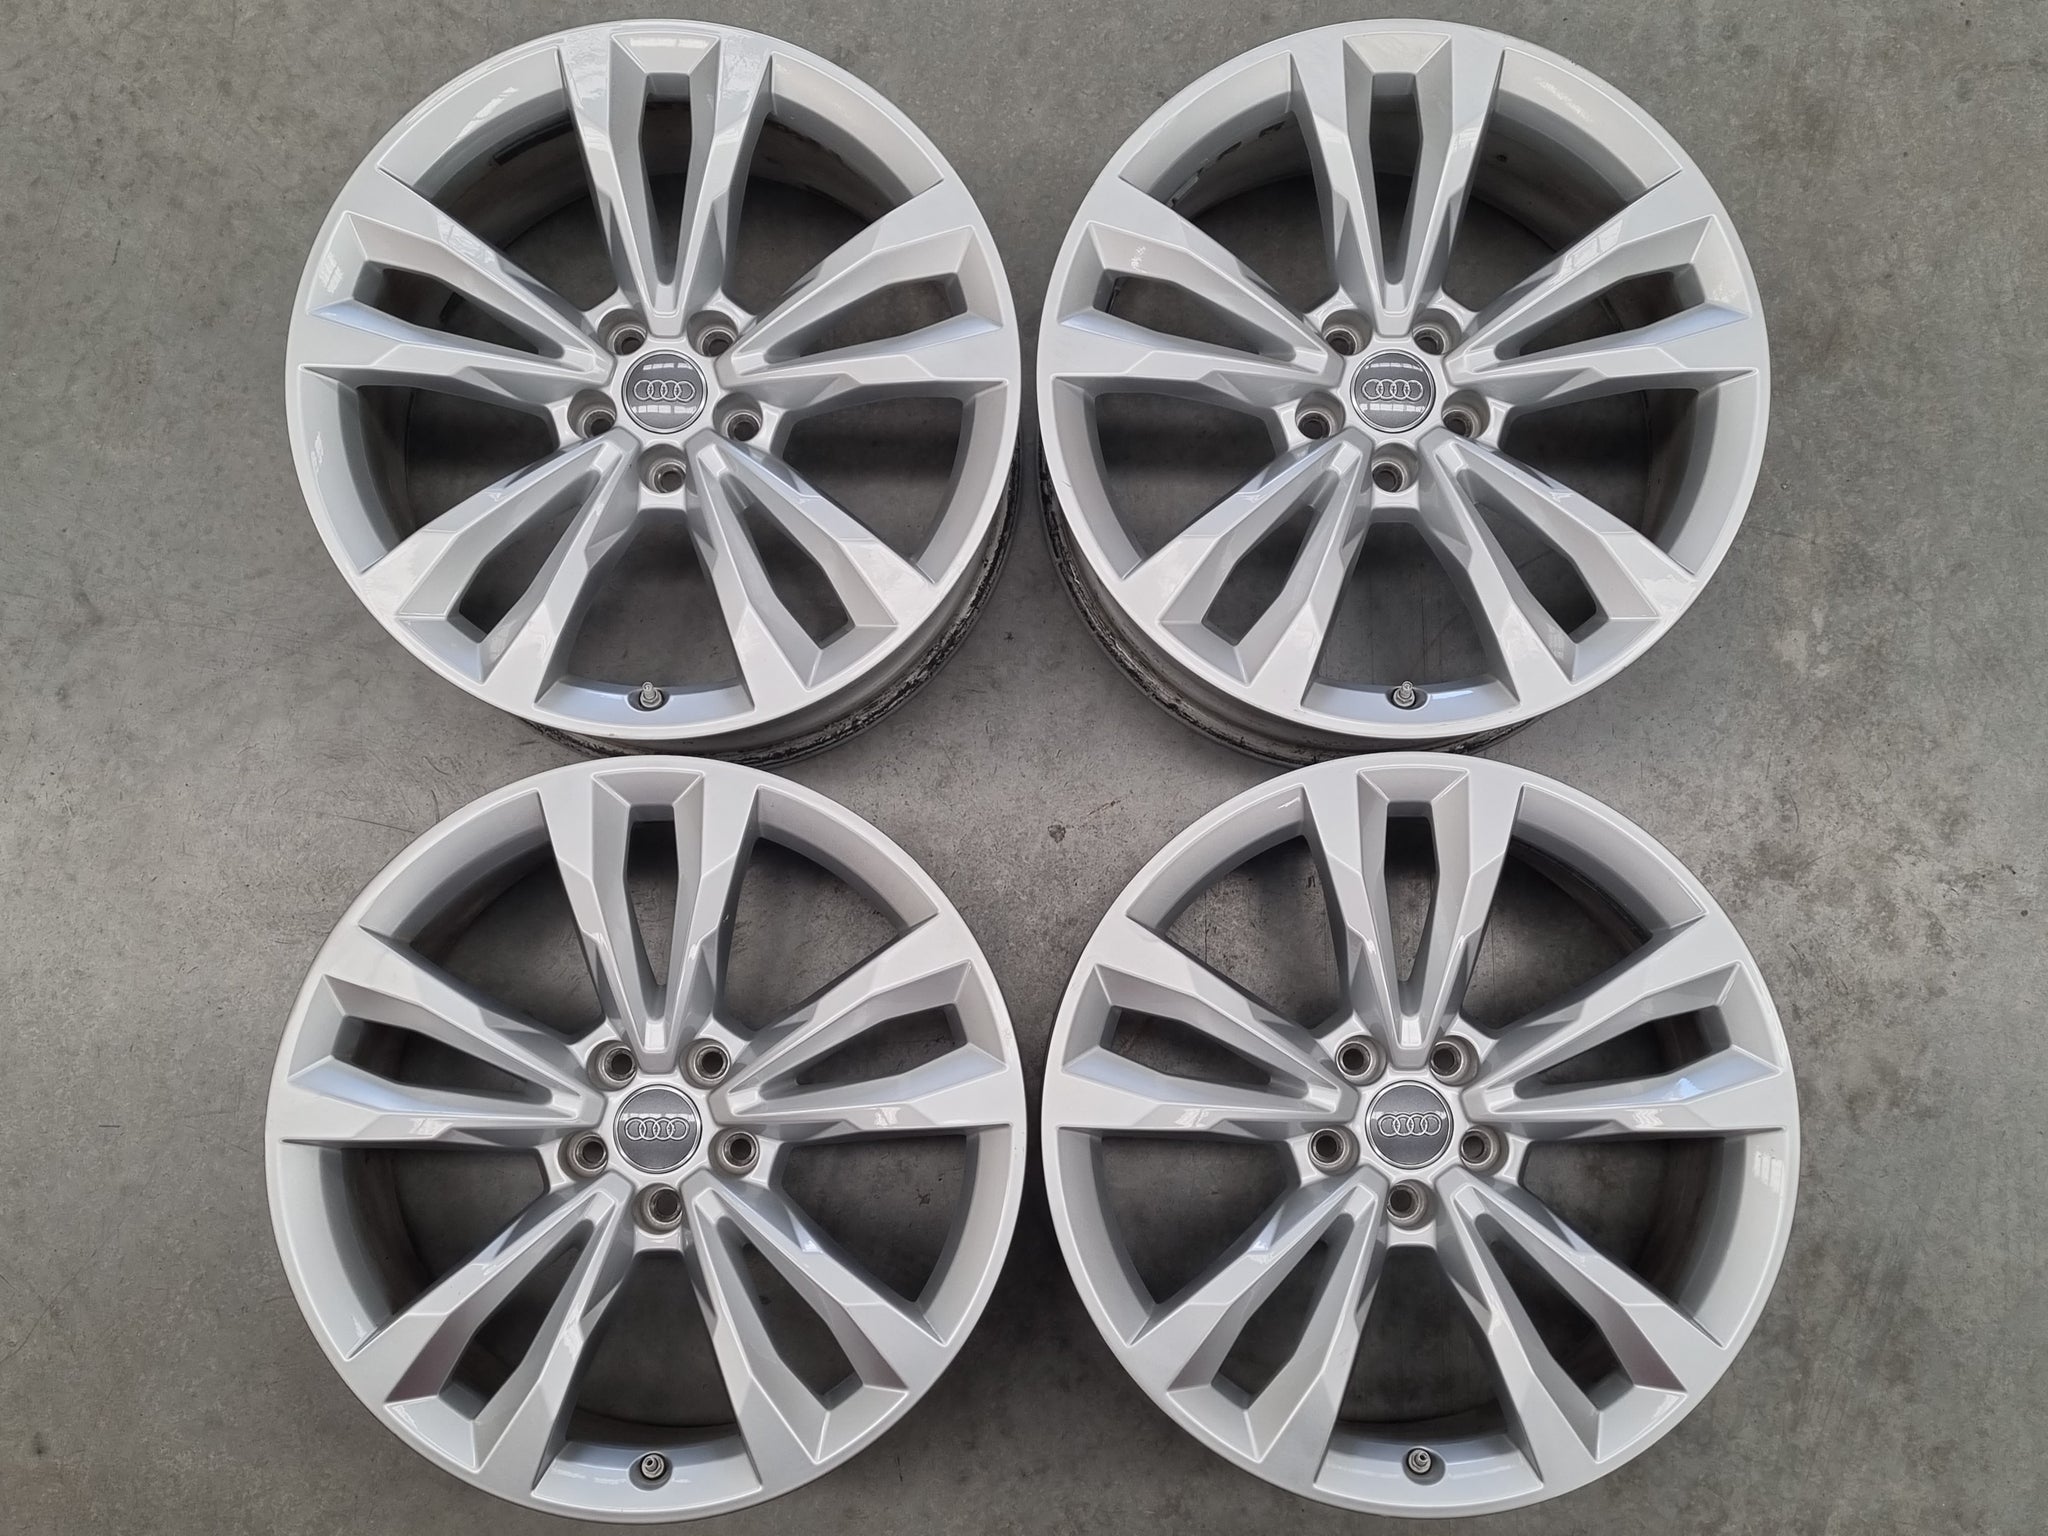 Load image into Gallery viewer, Genuine AUDI Q7 2018 Model 4M 19 Inch Alloy Wheels Set of 4
